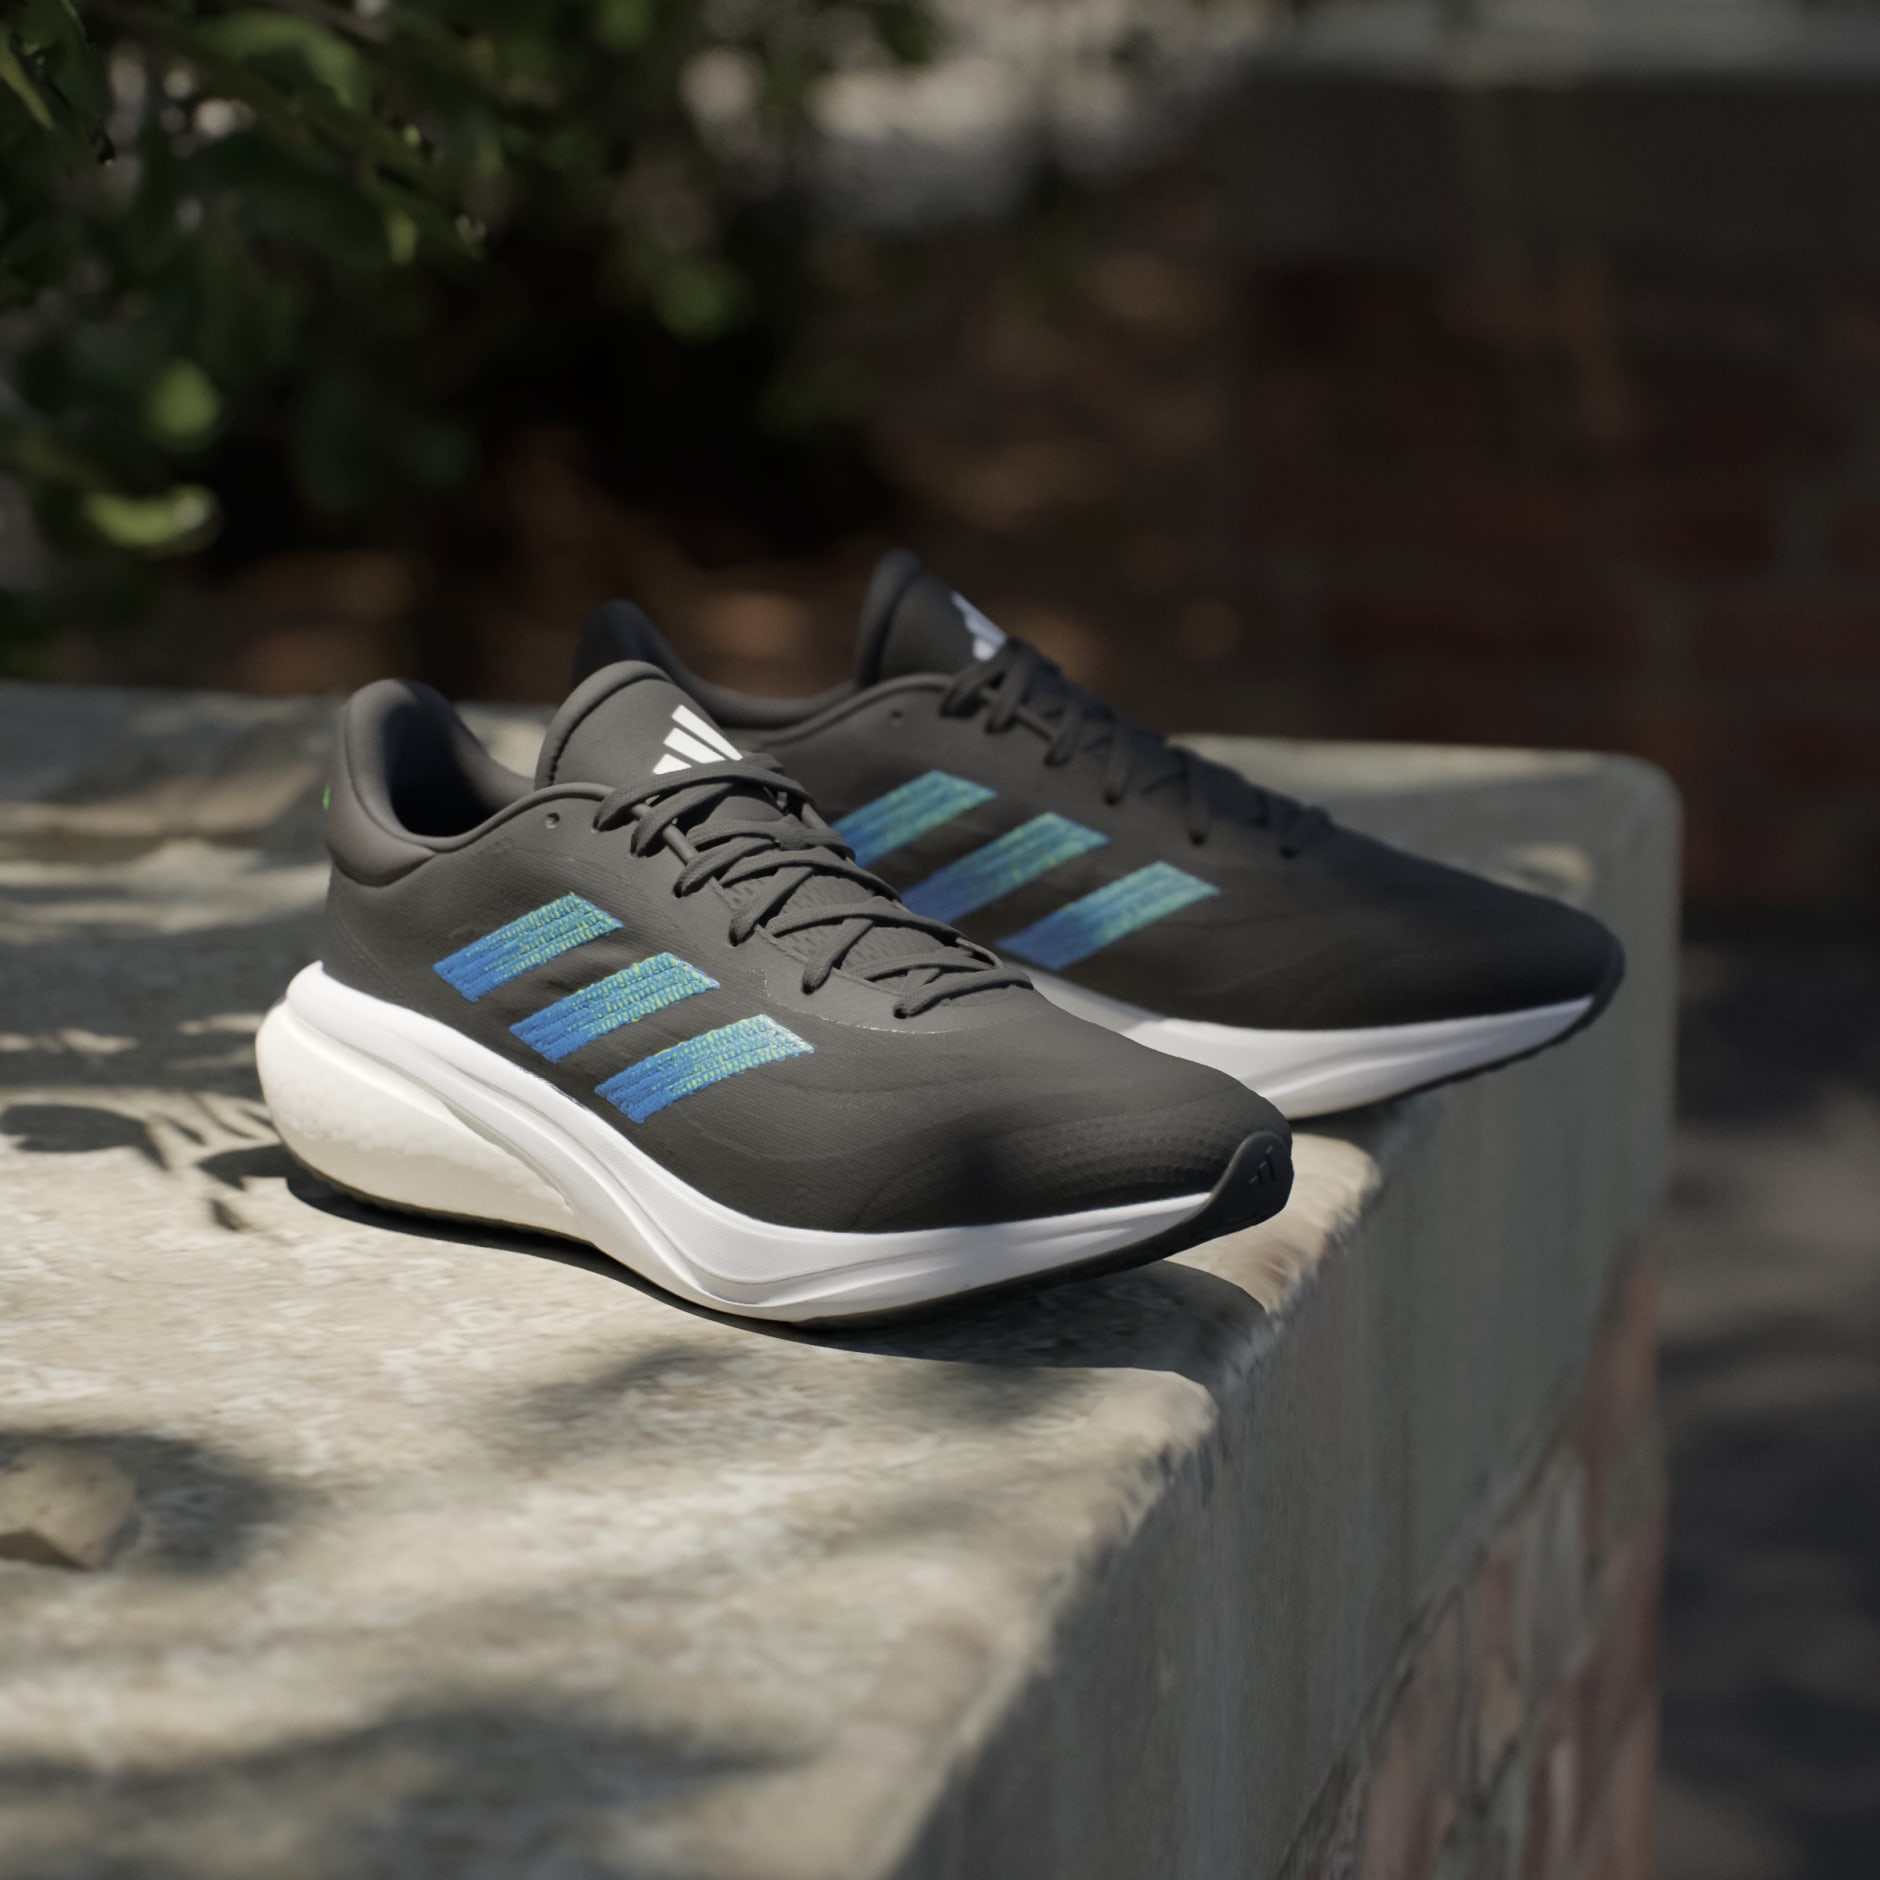 Shoes - Supernova 3 Running Shoes - Black | adidas South Africa